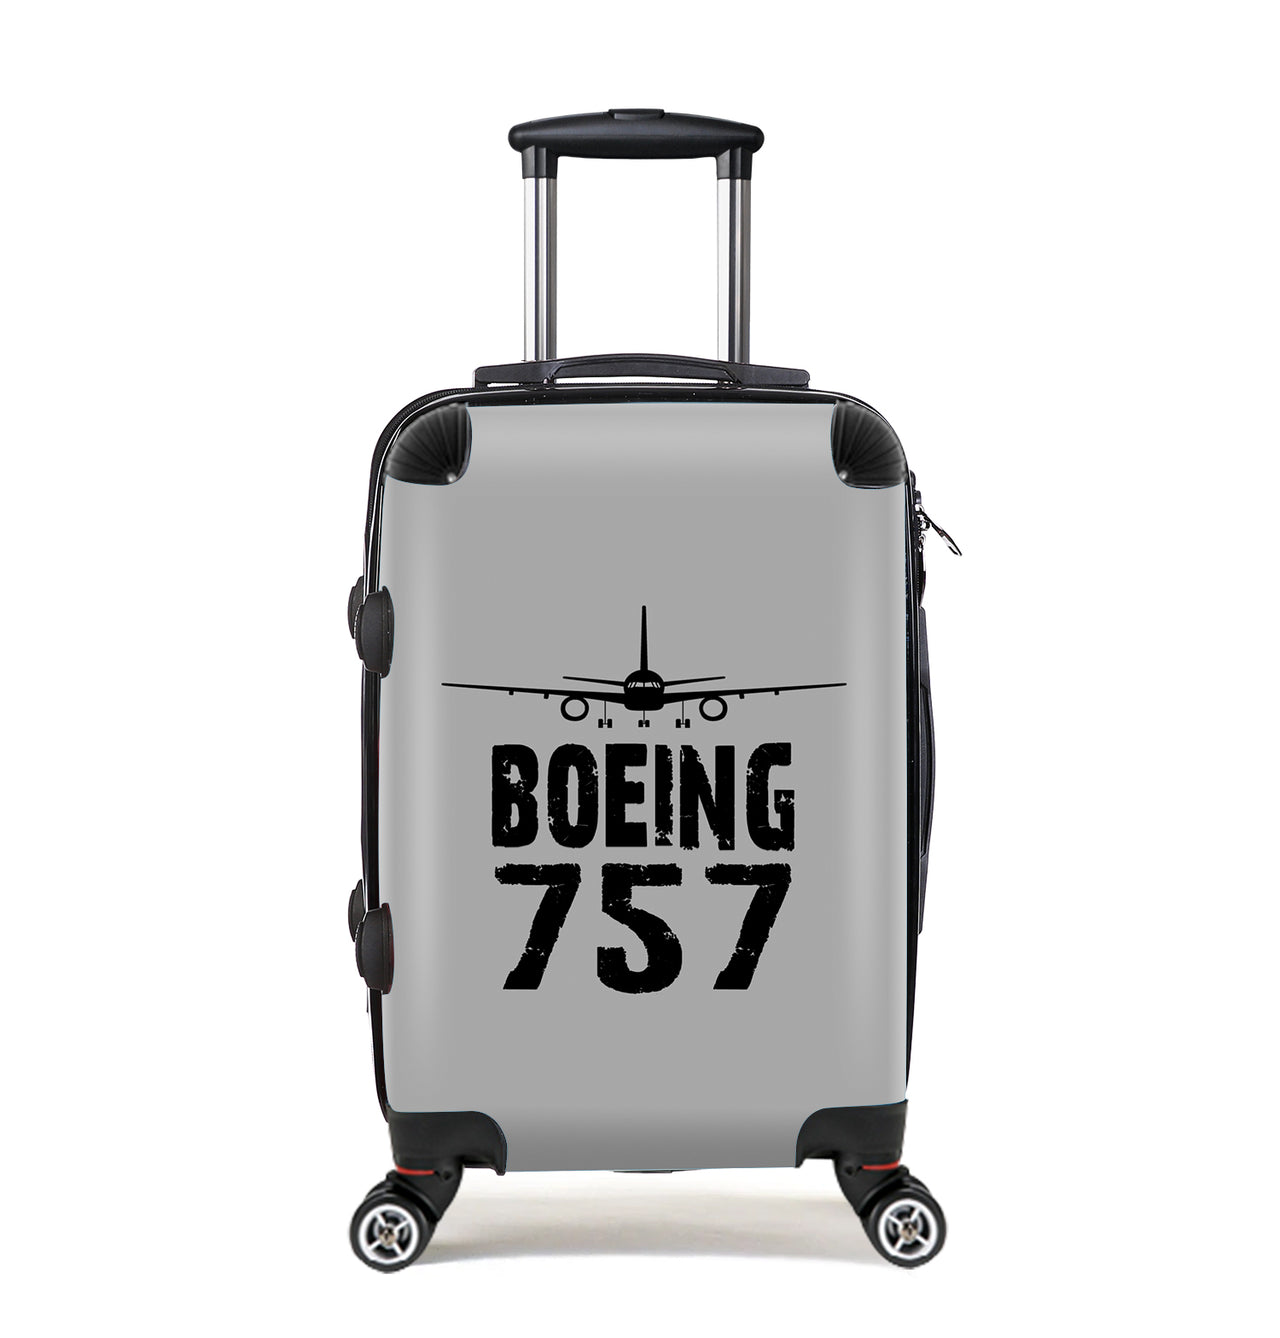 Boeing 757 & Plane Designed Cabin Size Luggages